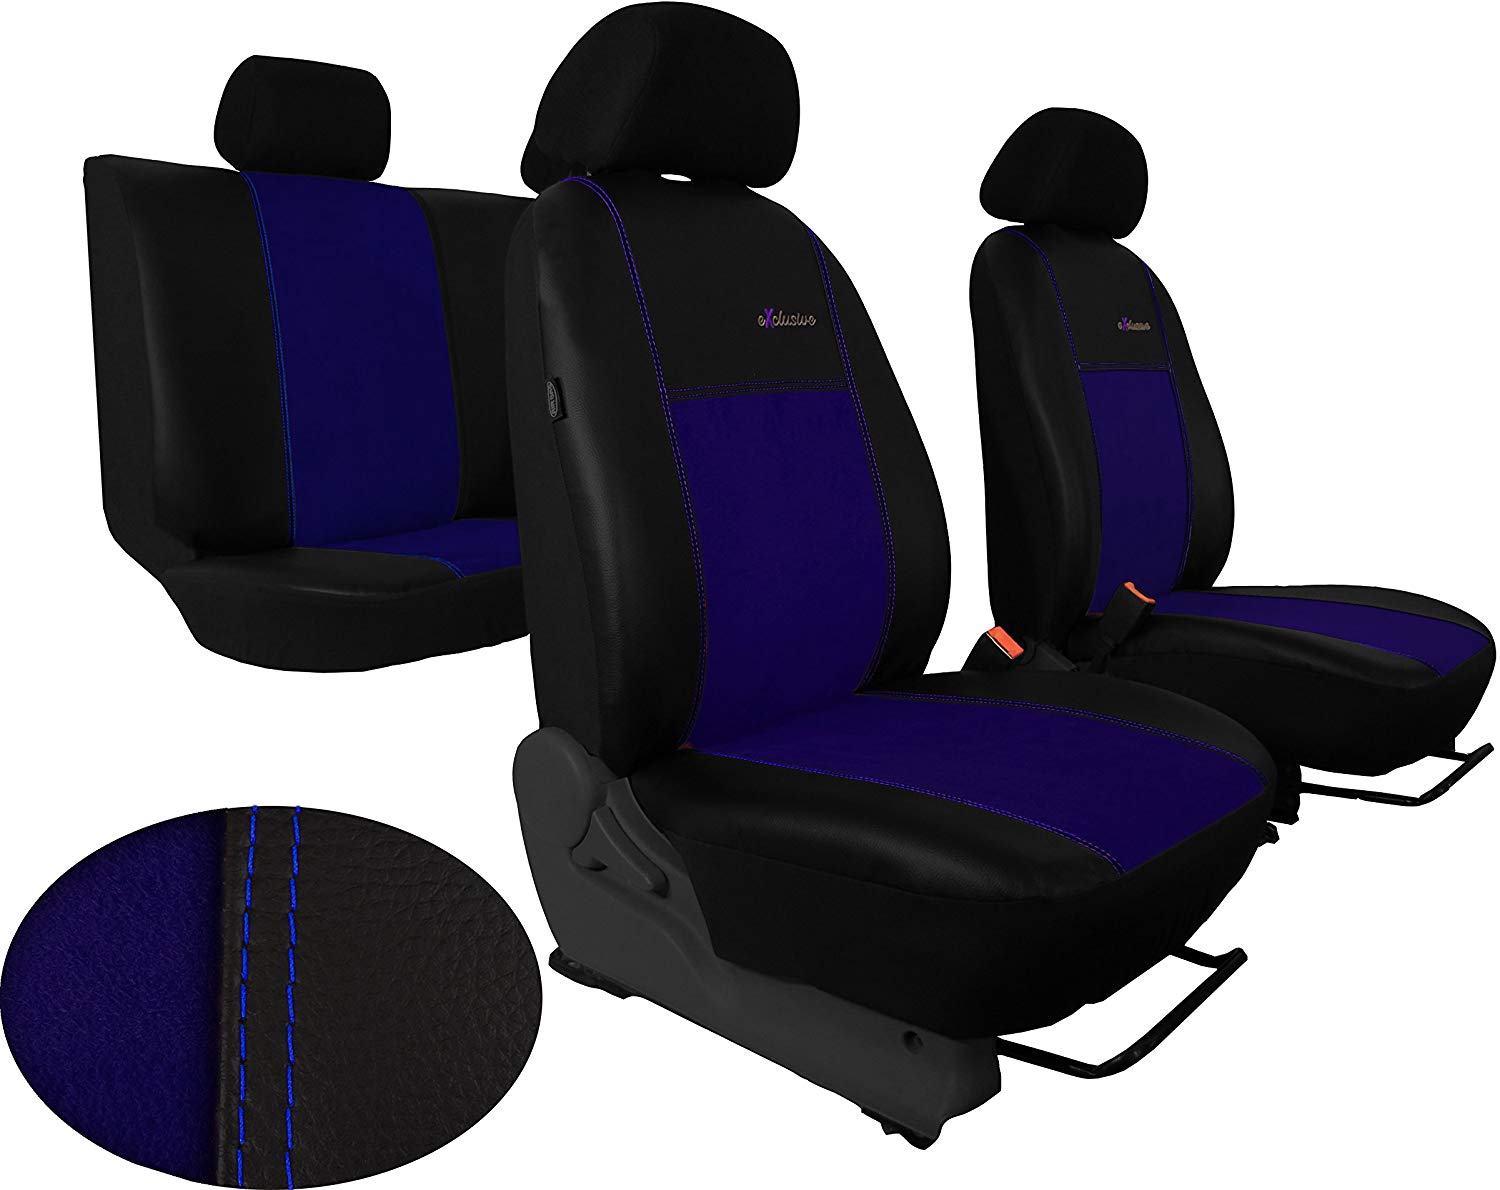 SEAT COVERS Exlusive In Eco Leather with Alcantara Seat for Hyundai i10